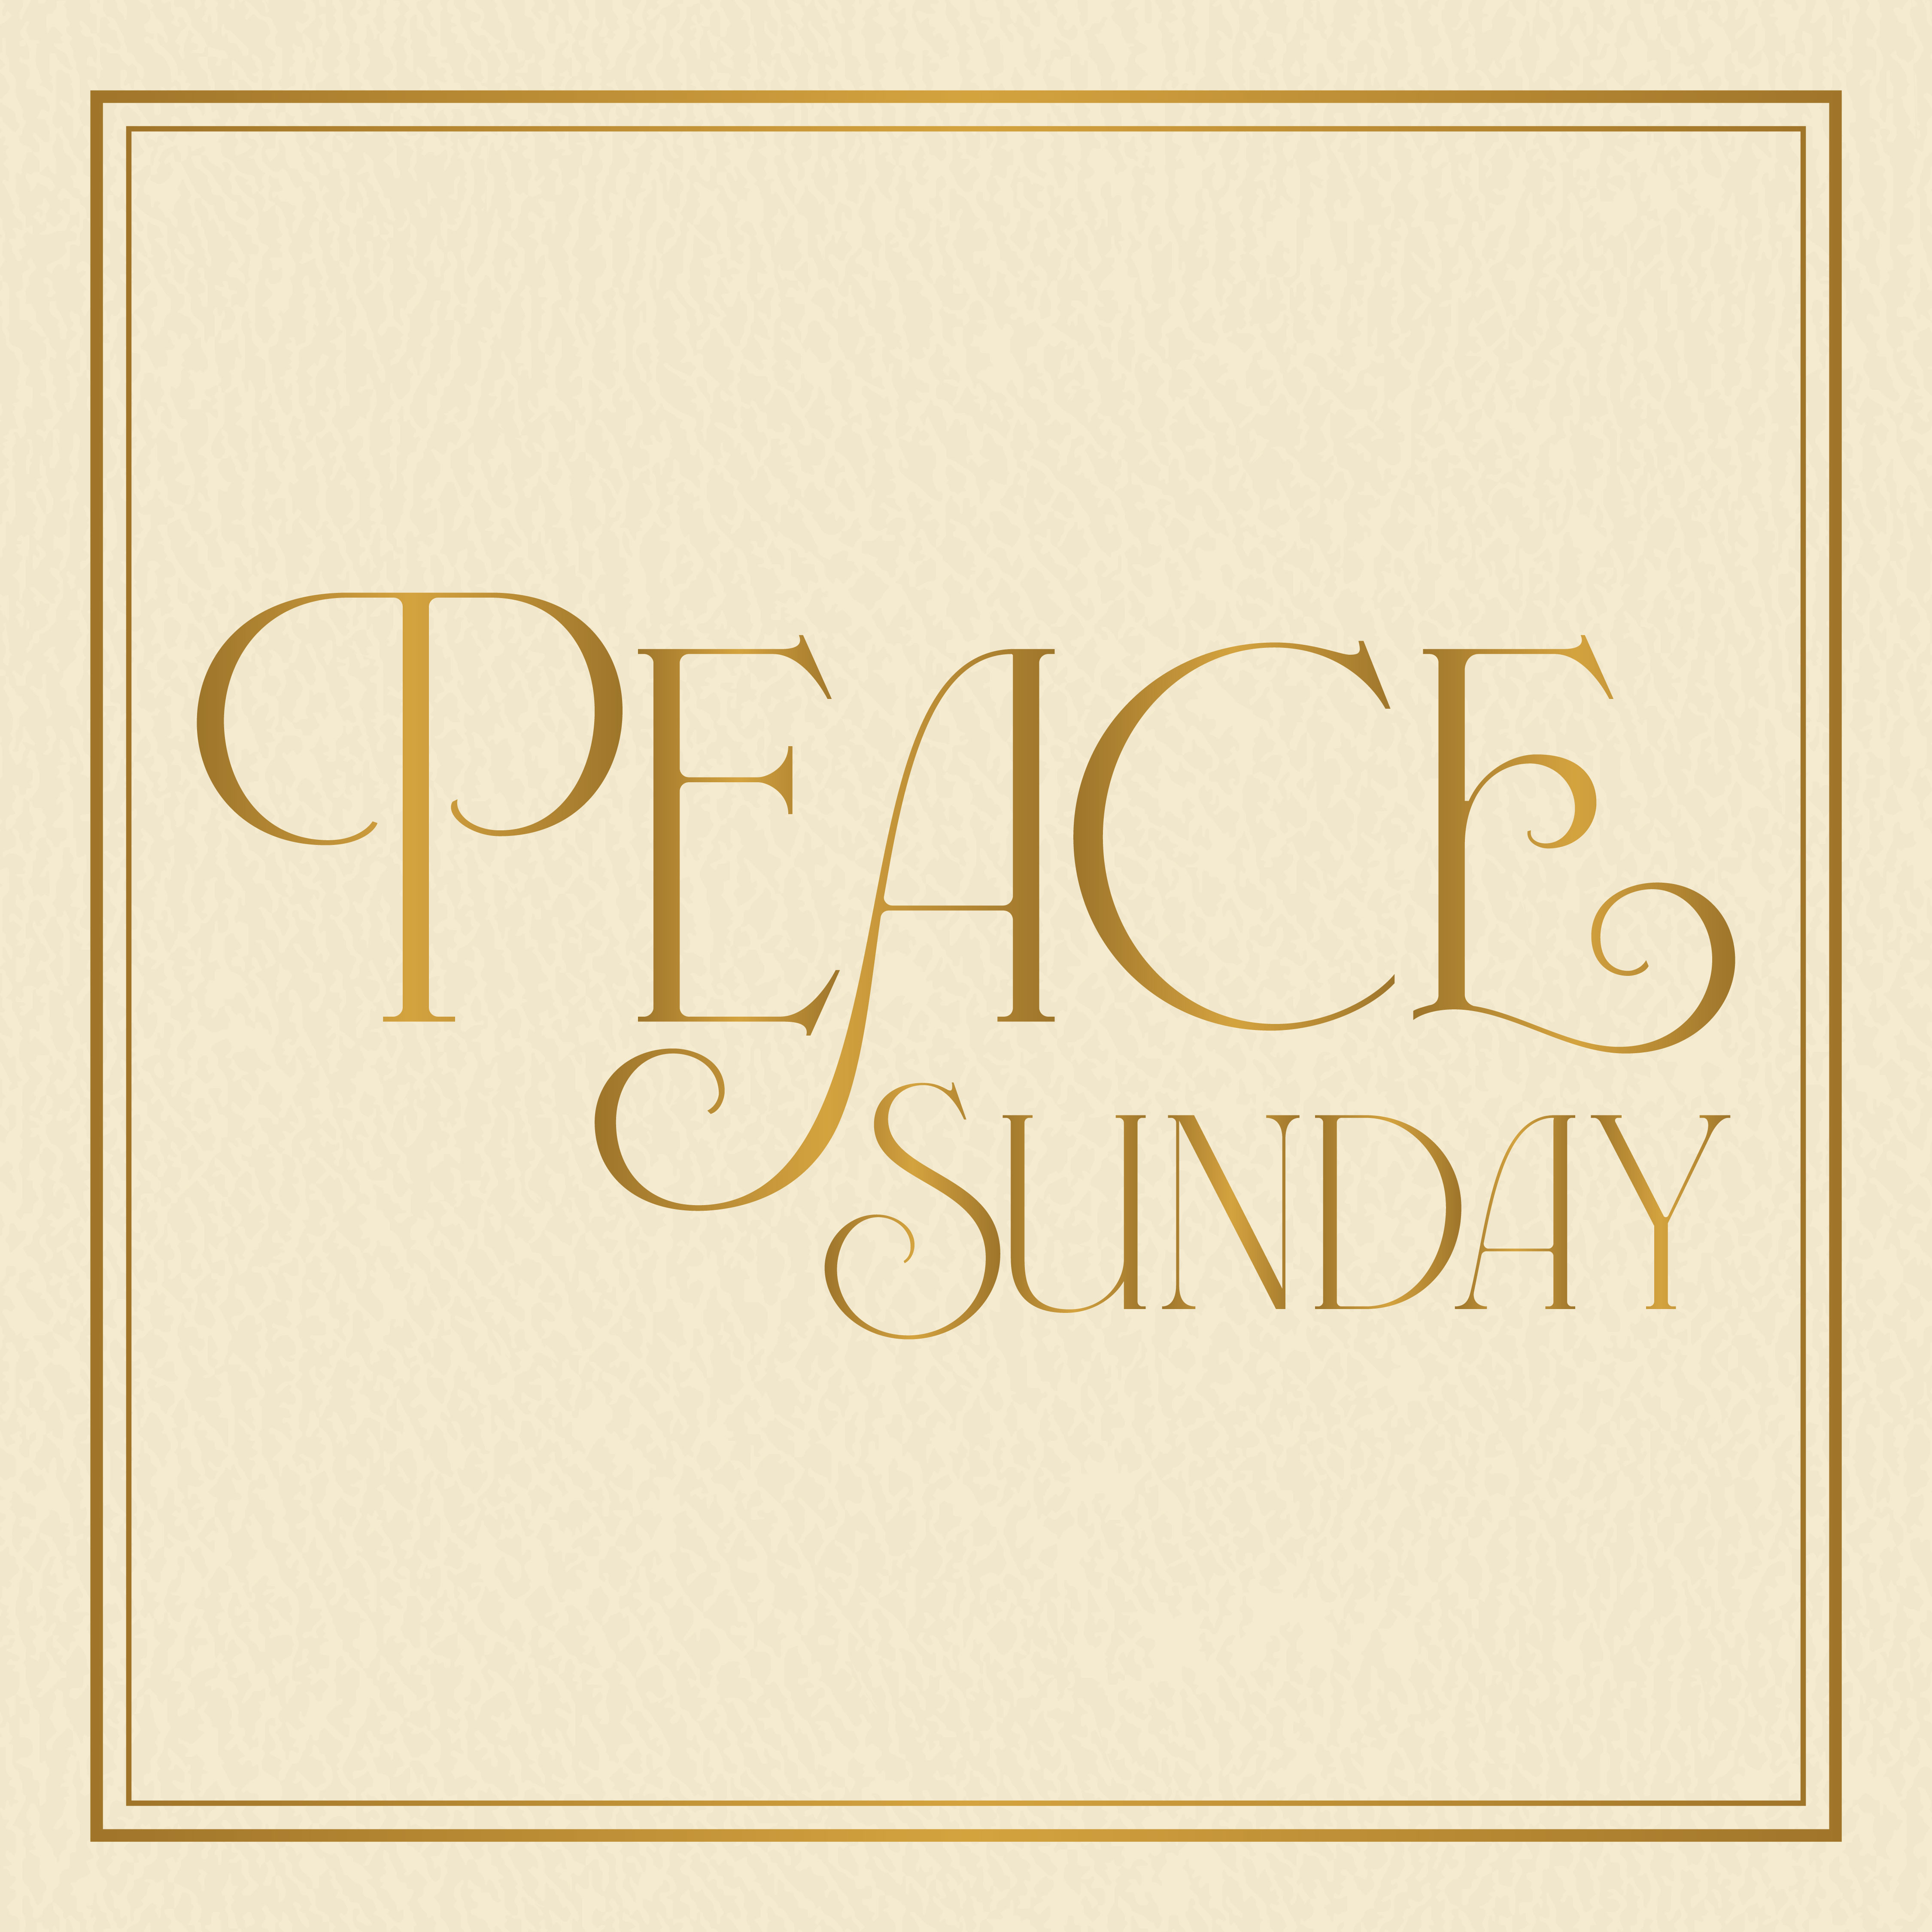 cream colored leather book cover with Peace sunday written across it